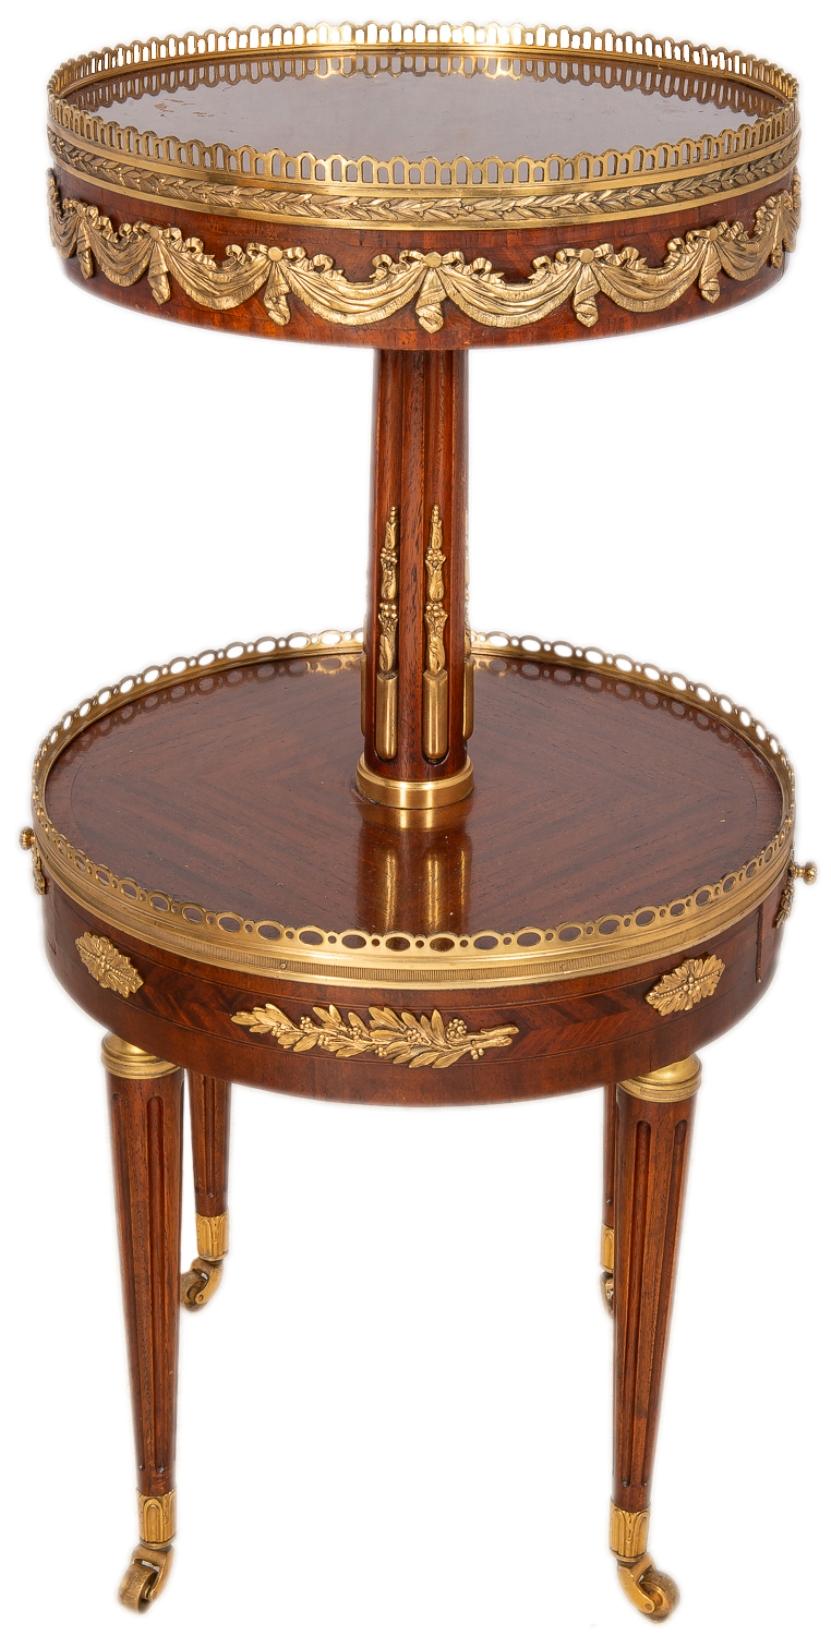 A good quality near pair of French Louis XVI style Mahogany two-tier circular side tables, each with gilded ormolu mounts, galleries to both tiers, a frieze drawer and raised on turned tapering fluted legs terminating in brass castors.